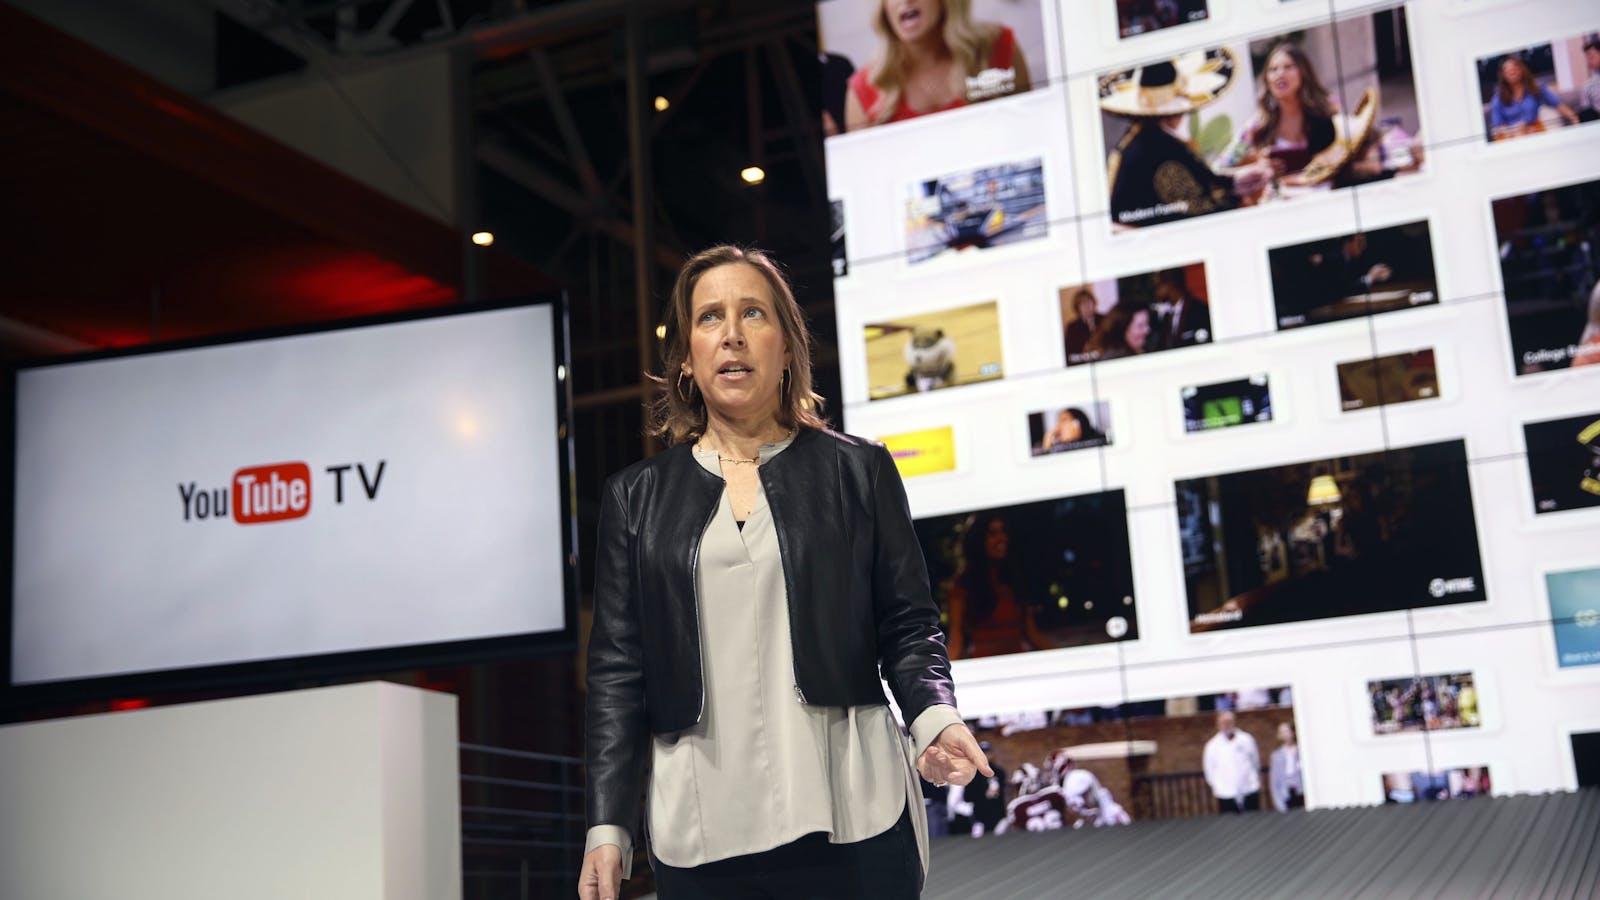 YouTube CEO Susan Wojcicki at the announcement of YouTube TV last year. Photo by Bloomberg.